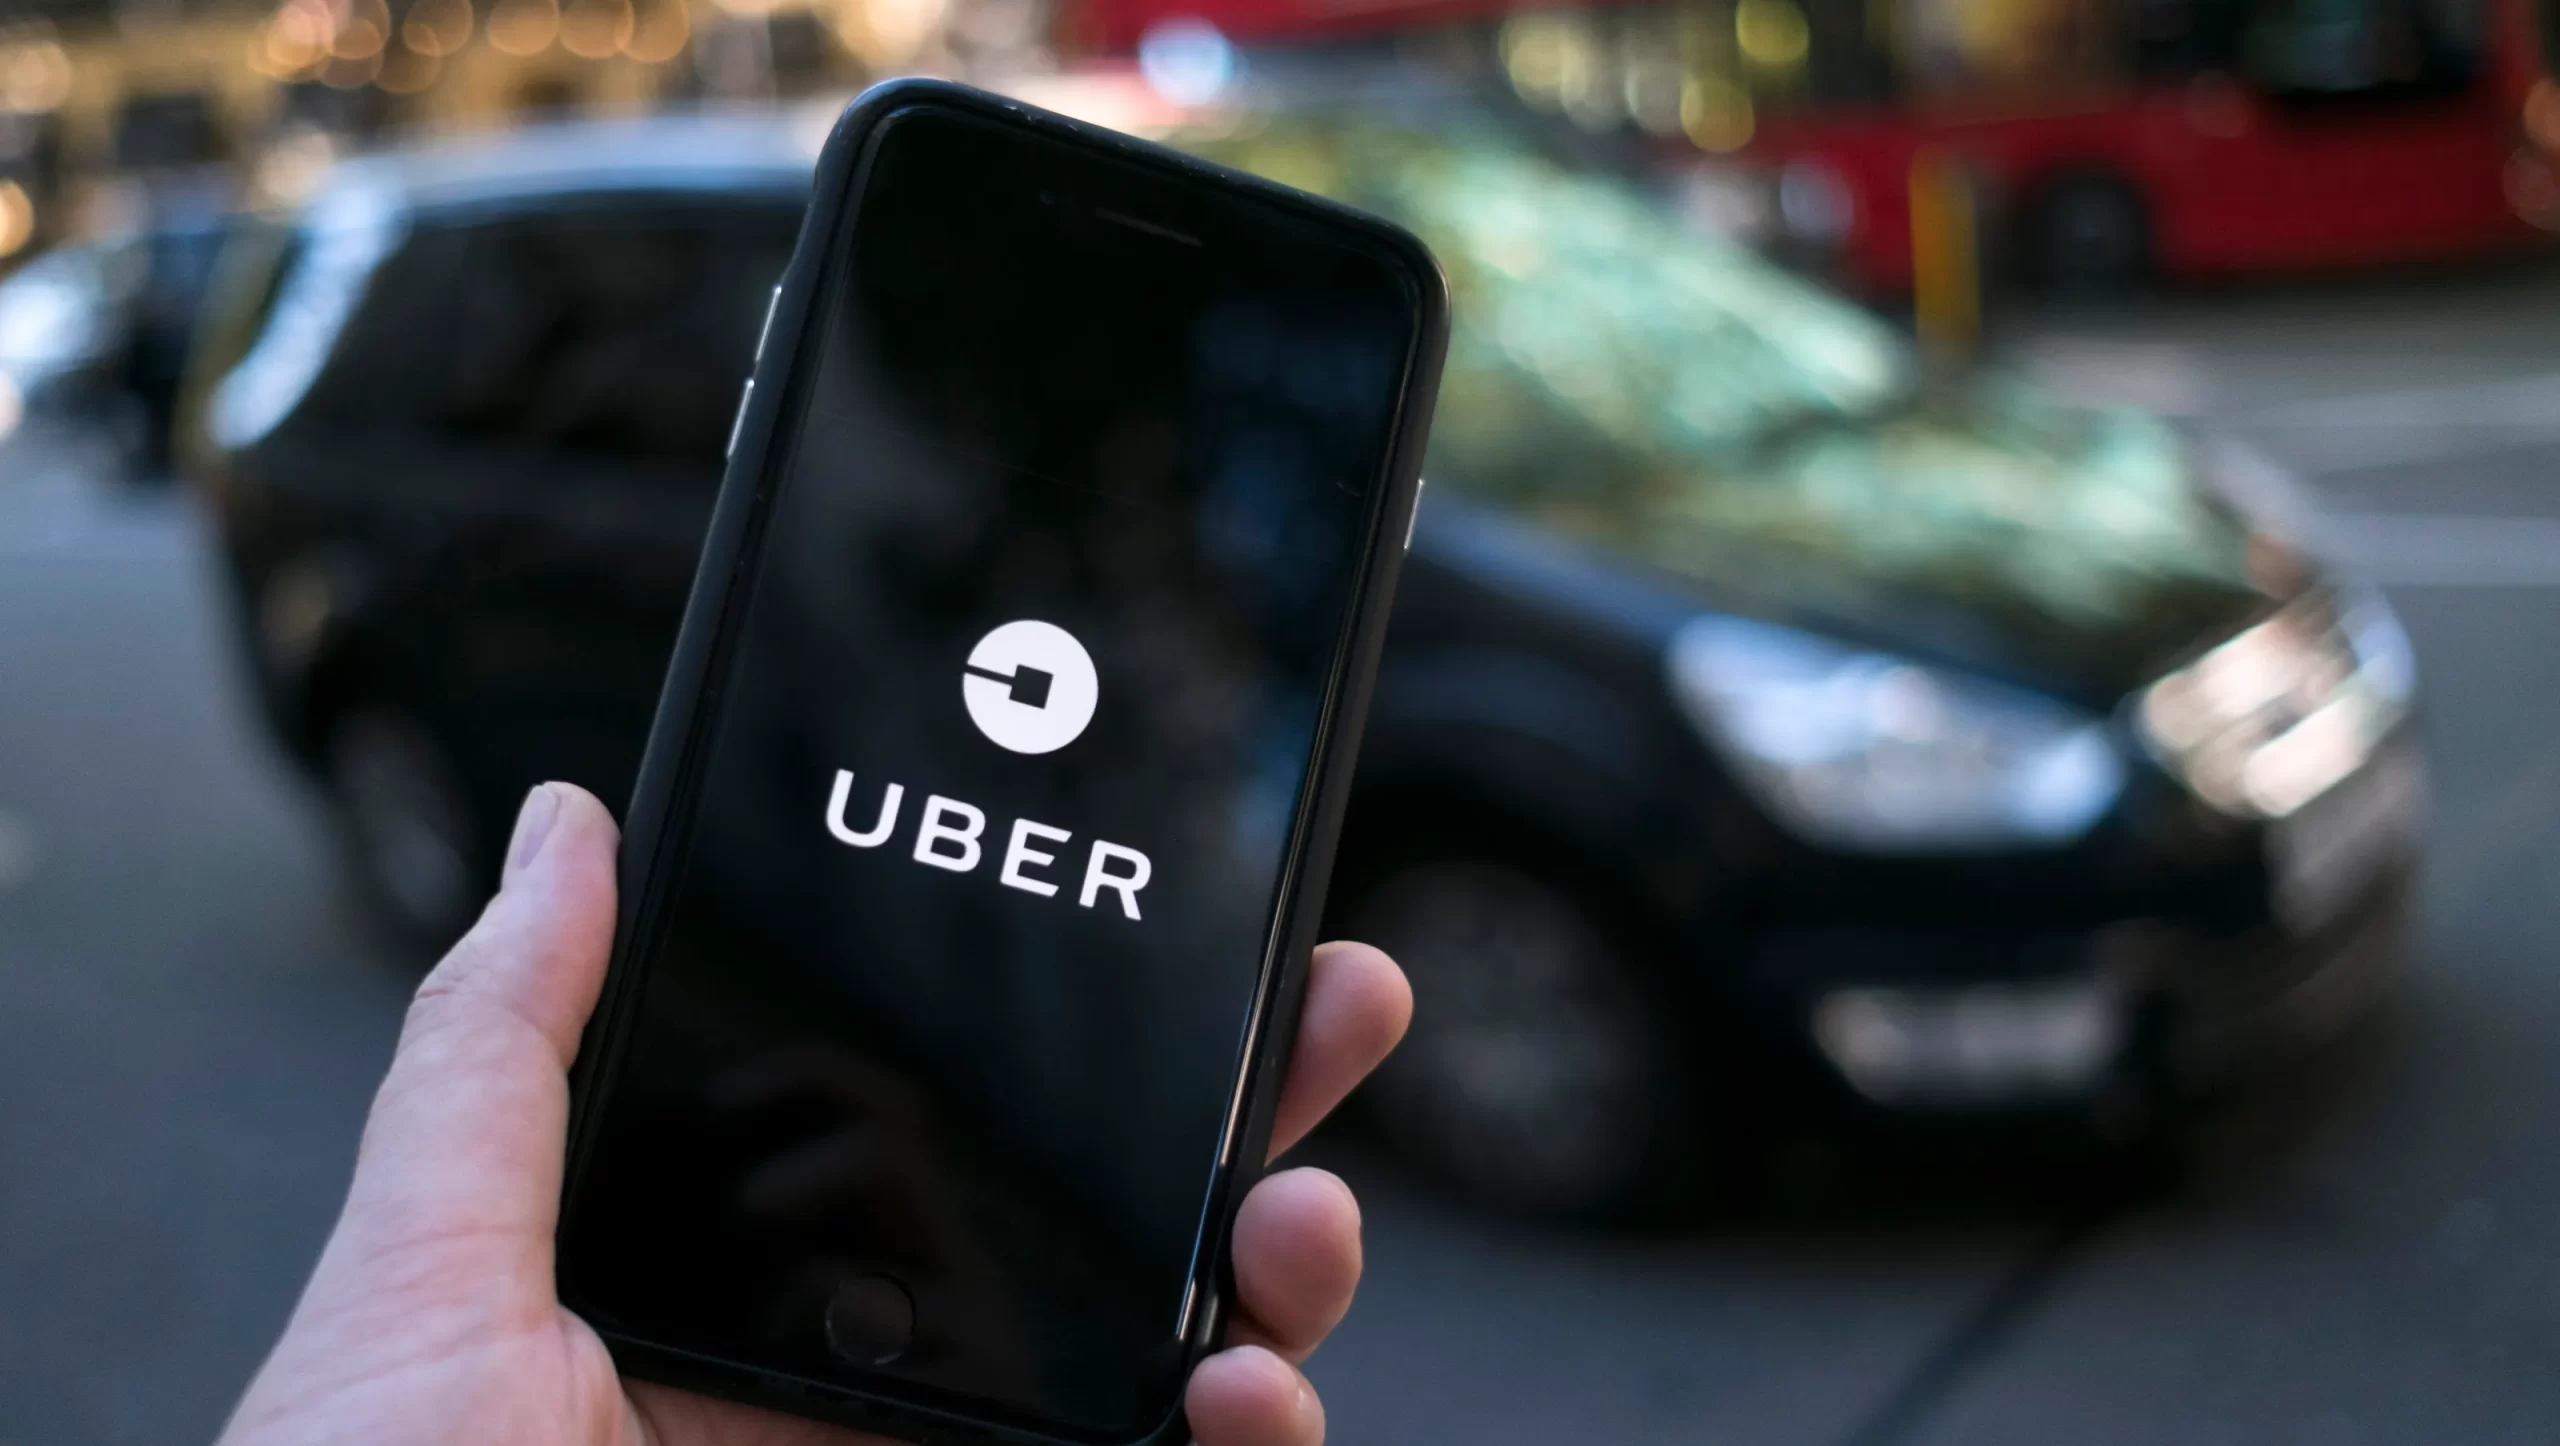 How Much Does a 20-Minute Uber Cost?